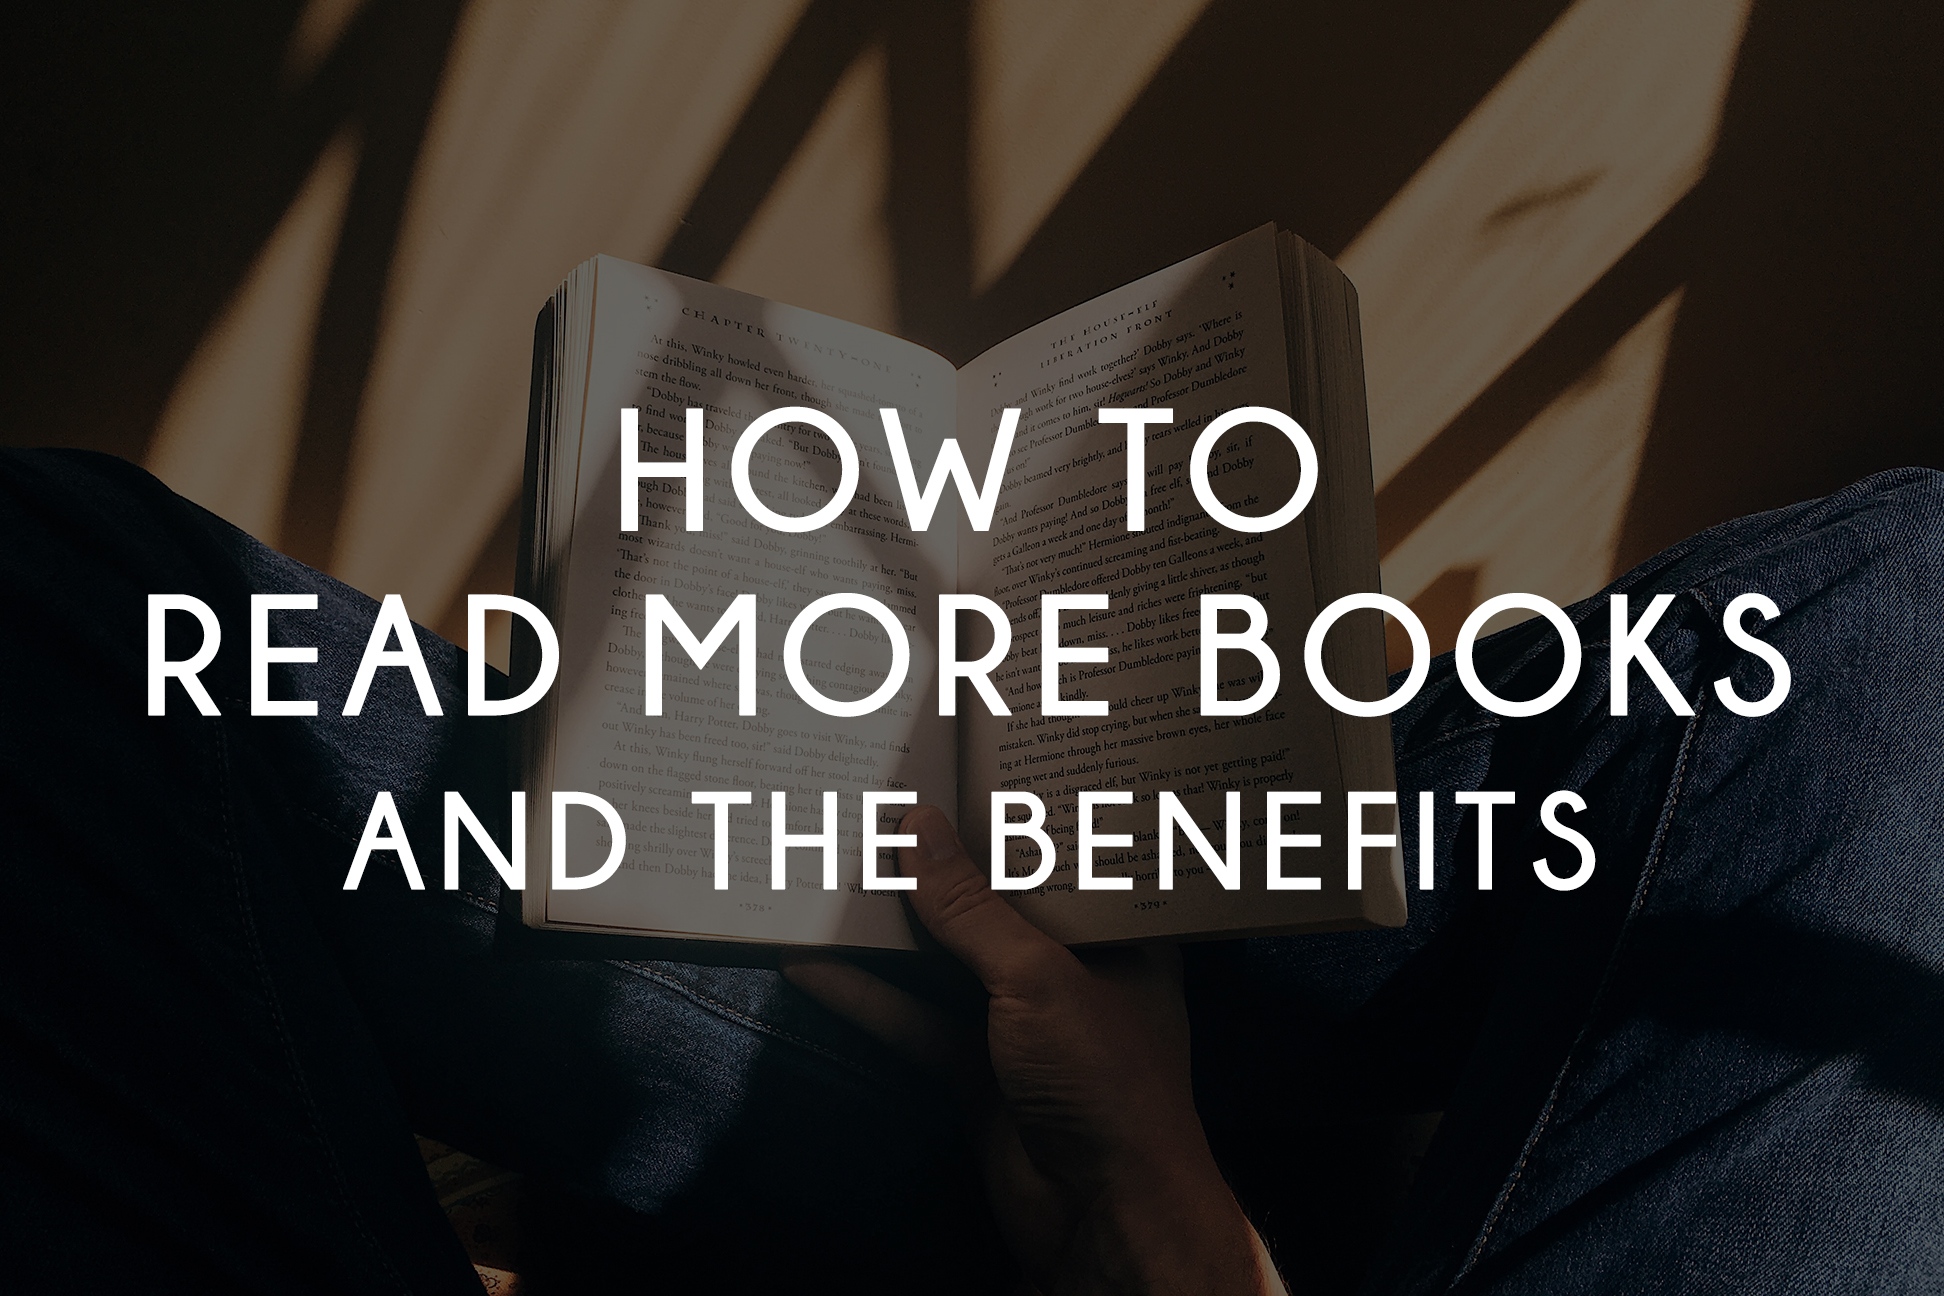 HOW TO READ MORE BOOKS AND THE BENEFITS Tapan Desai